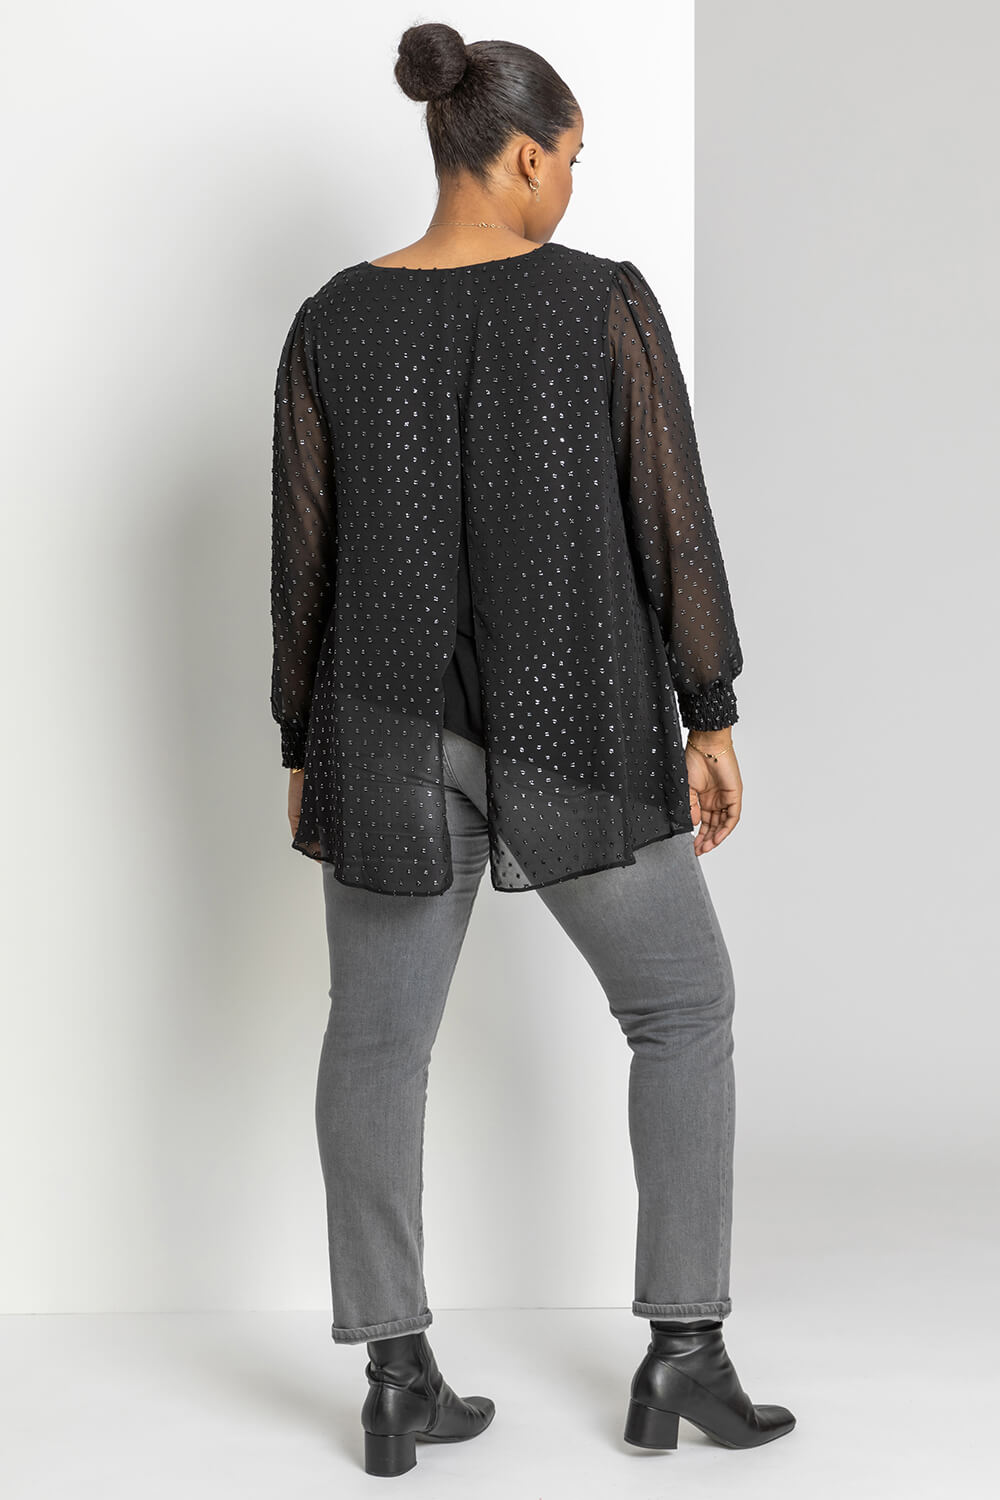 Silver Curve Metallic Textured Spot Blouse, Image 2 of 4